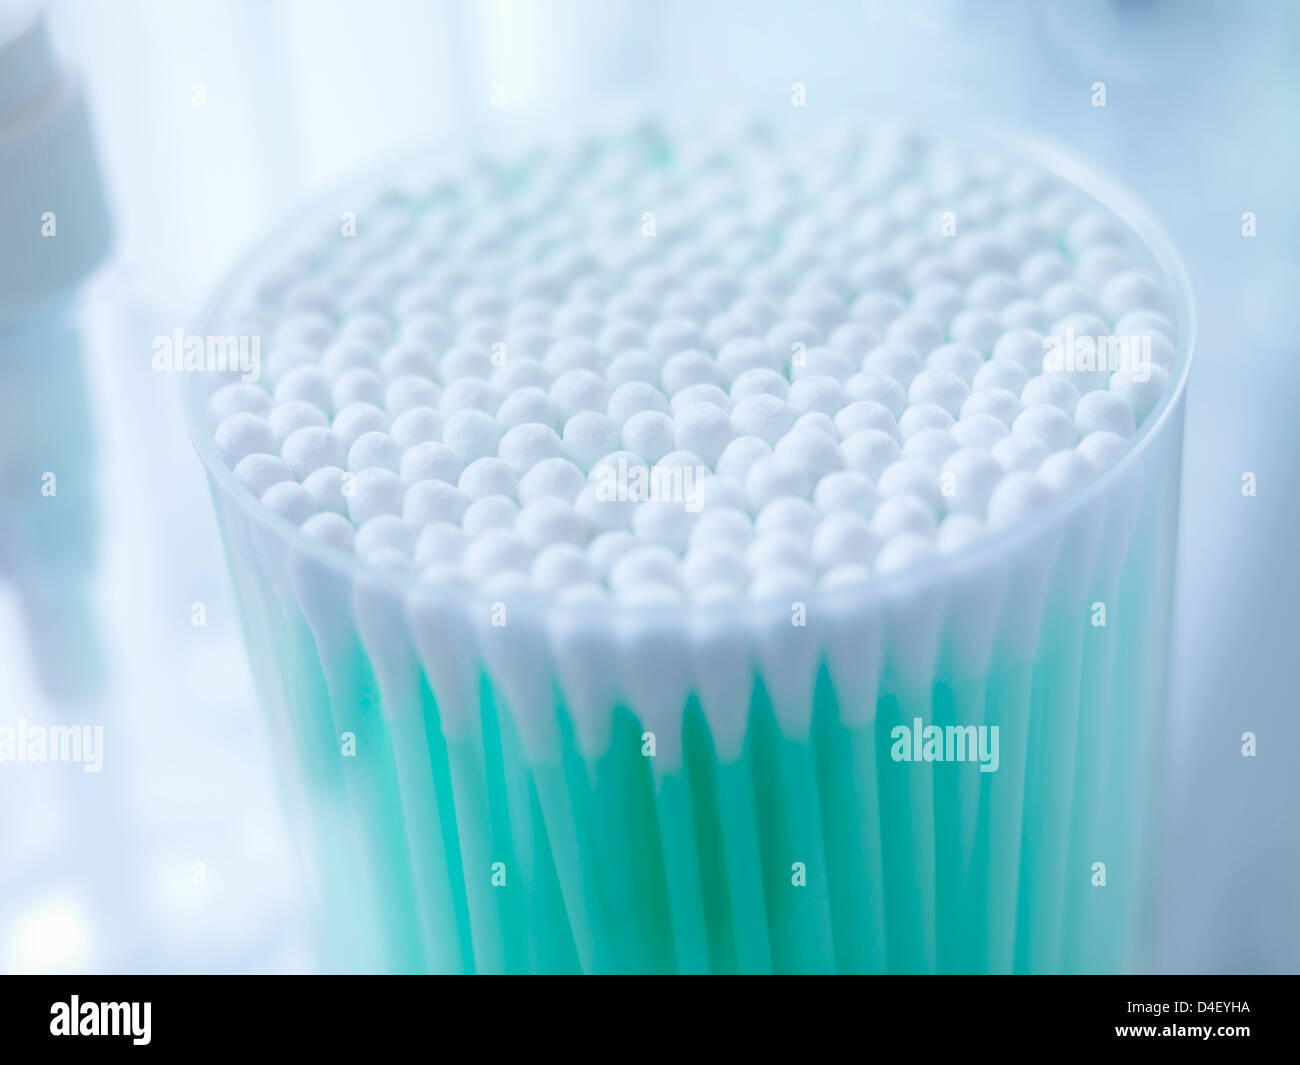 Close up of cup of cotton buds Stock Photo